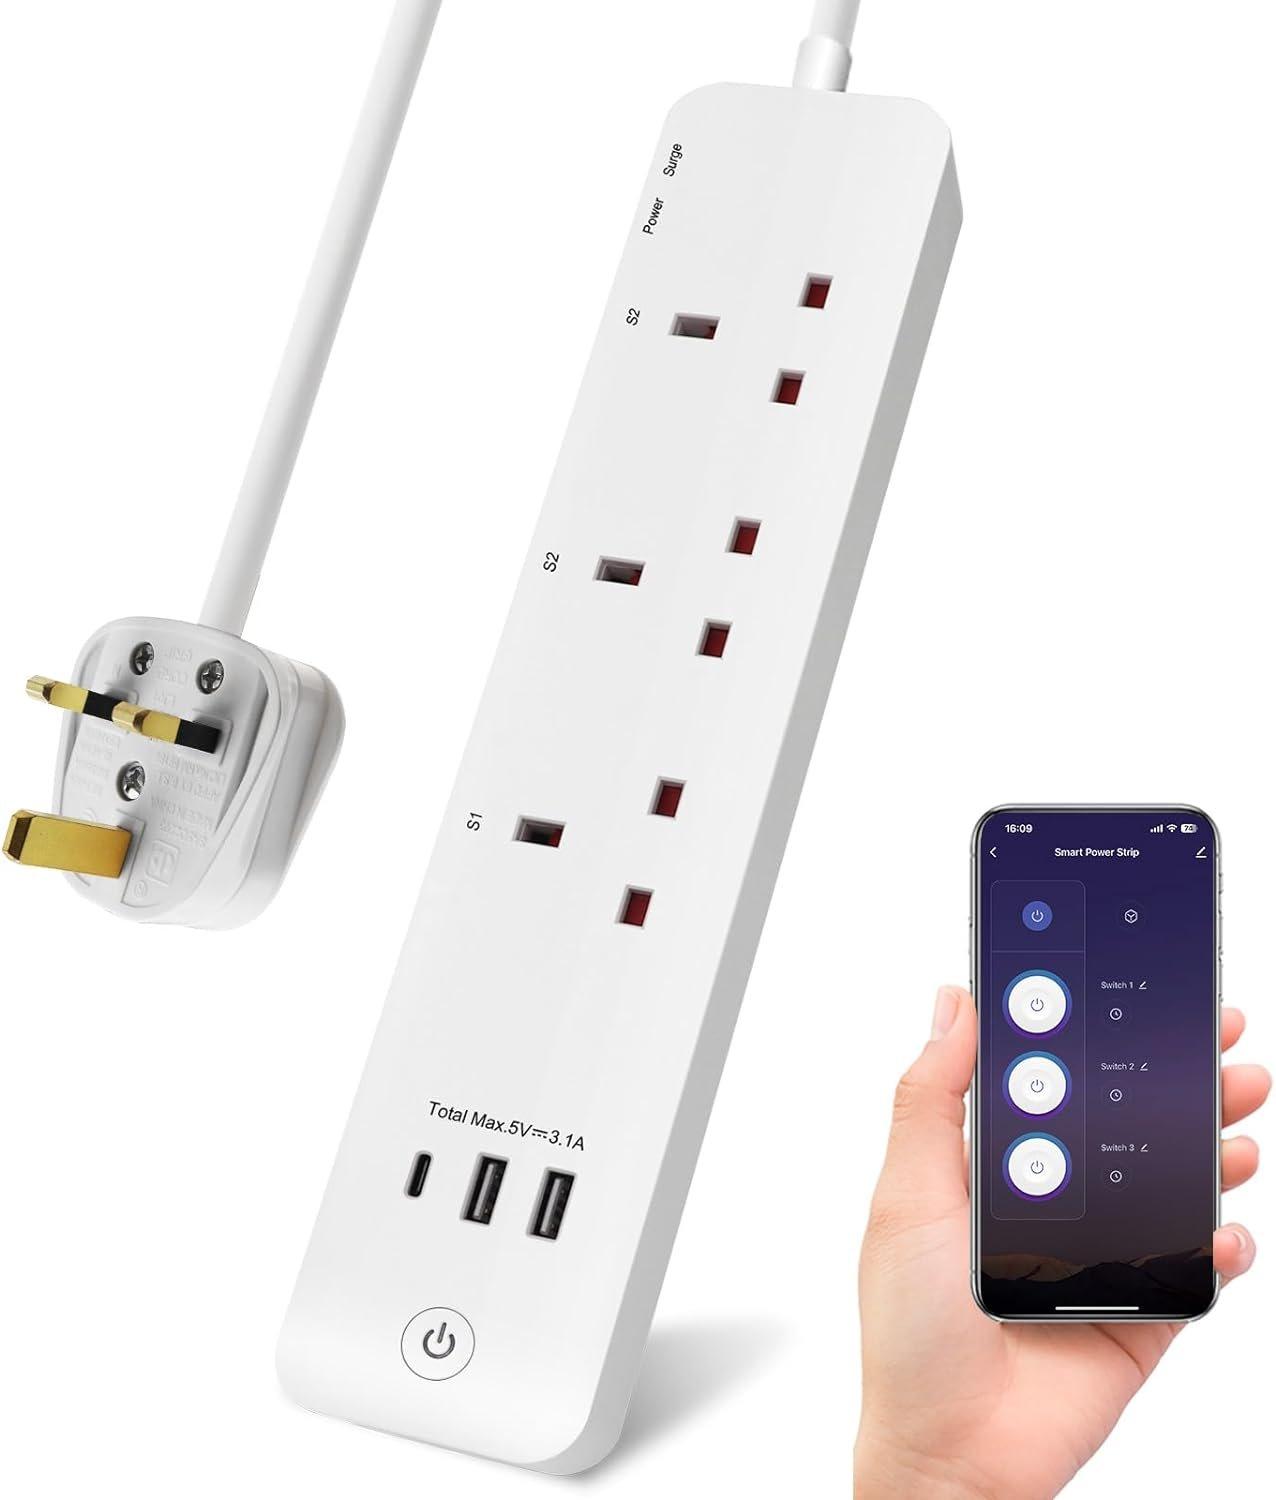 Smart Extension Lead 3 Outlets Surge Protected 1.4M, Wi-Fi Extension Lead with 3 USB Ports (2 USB A+